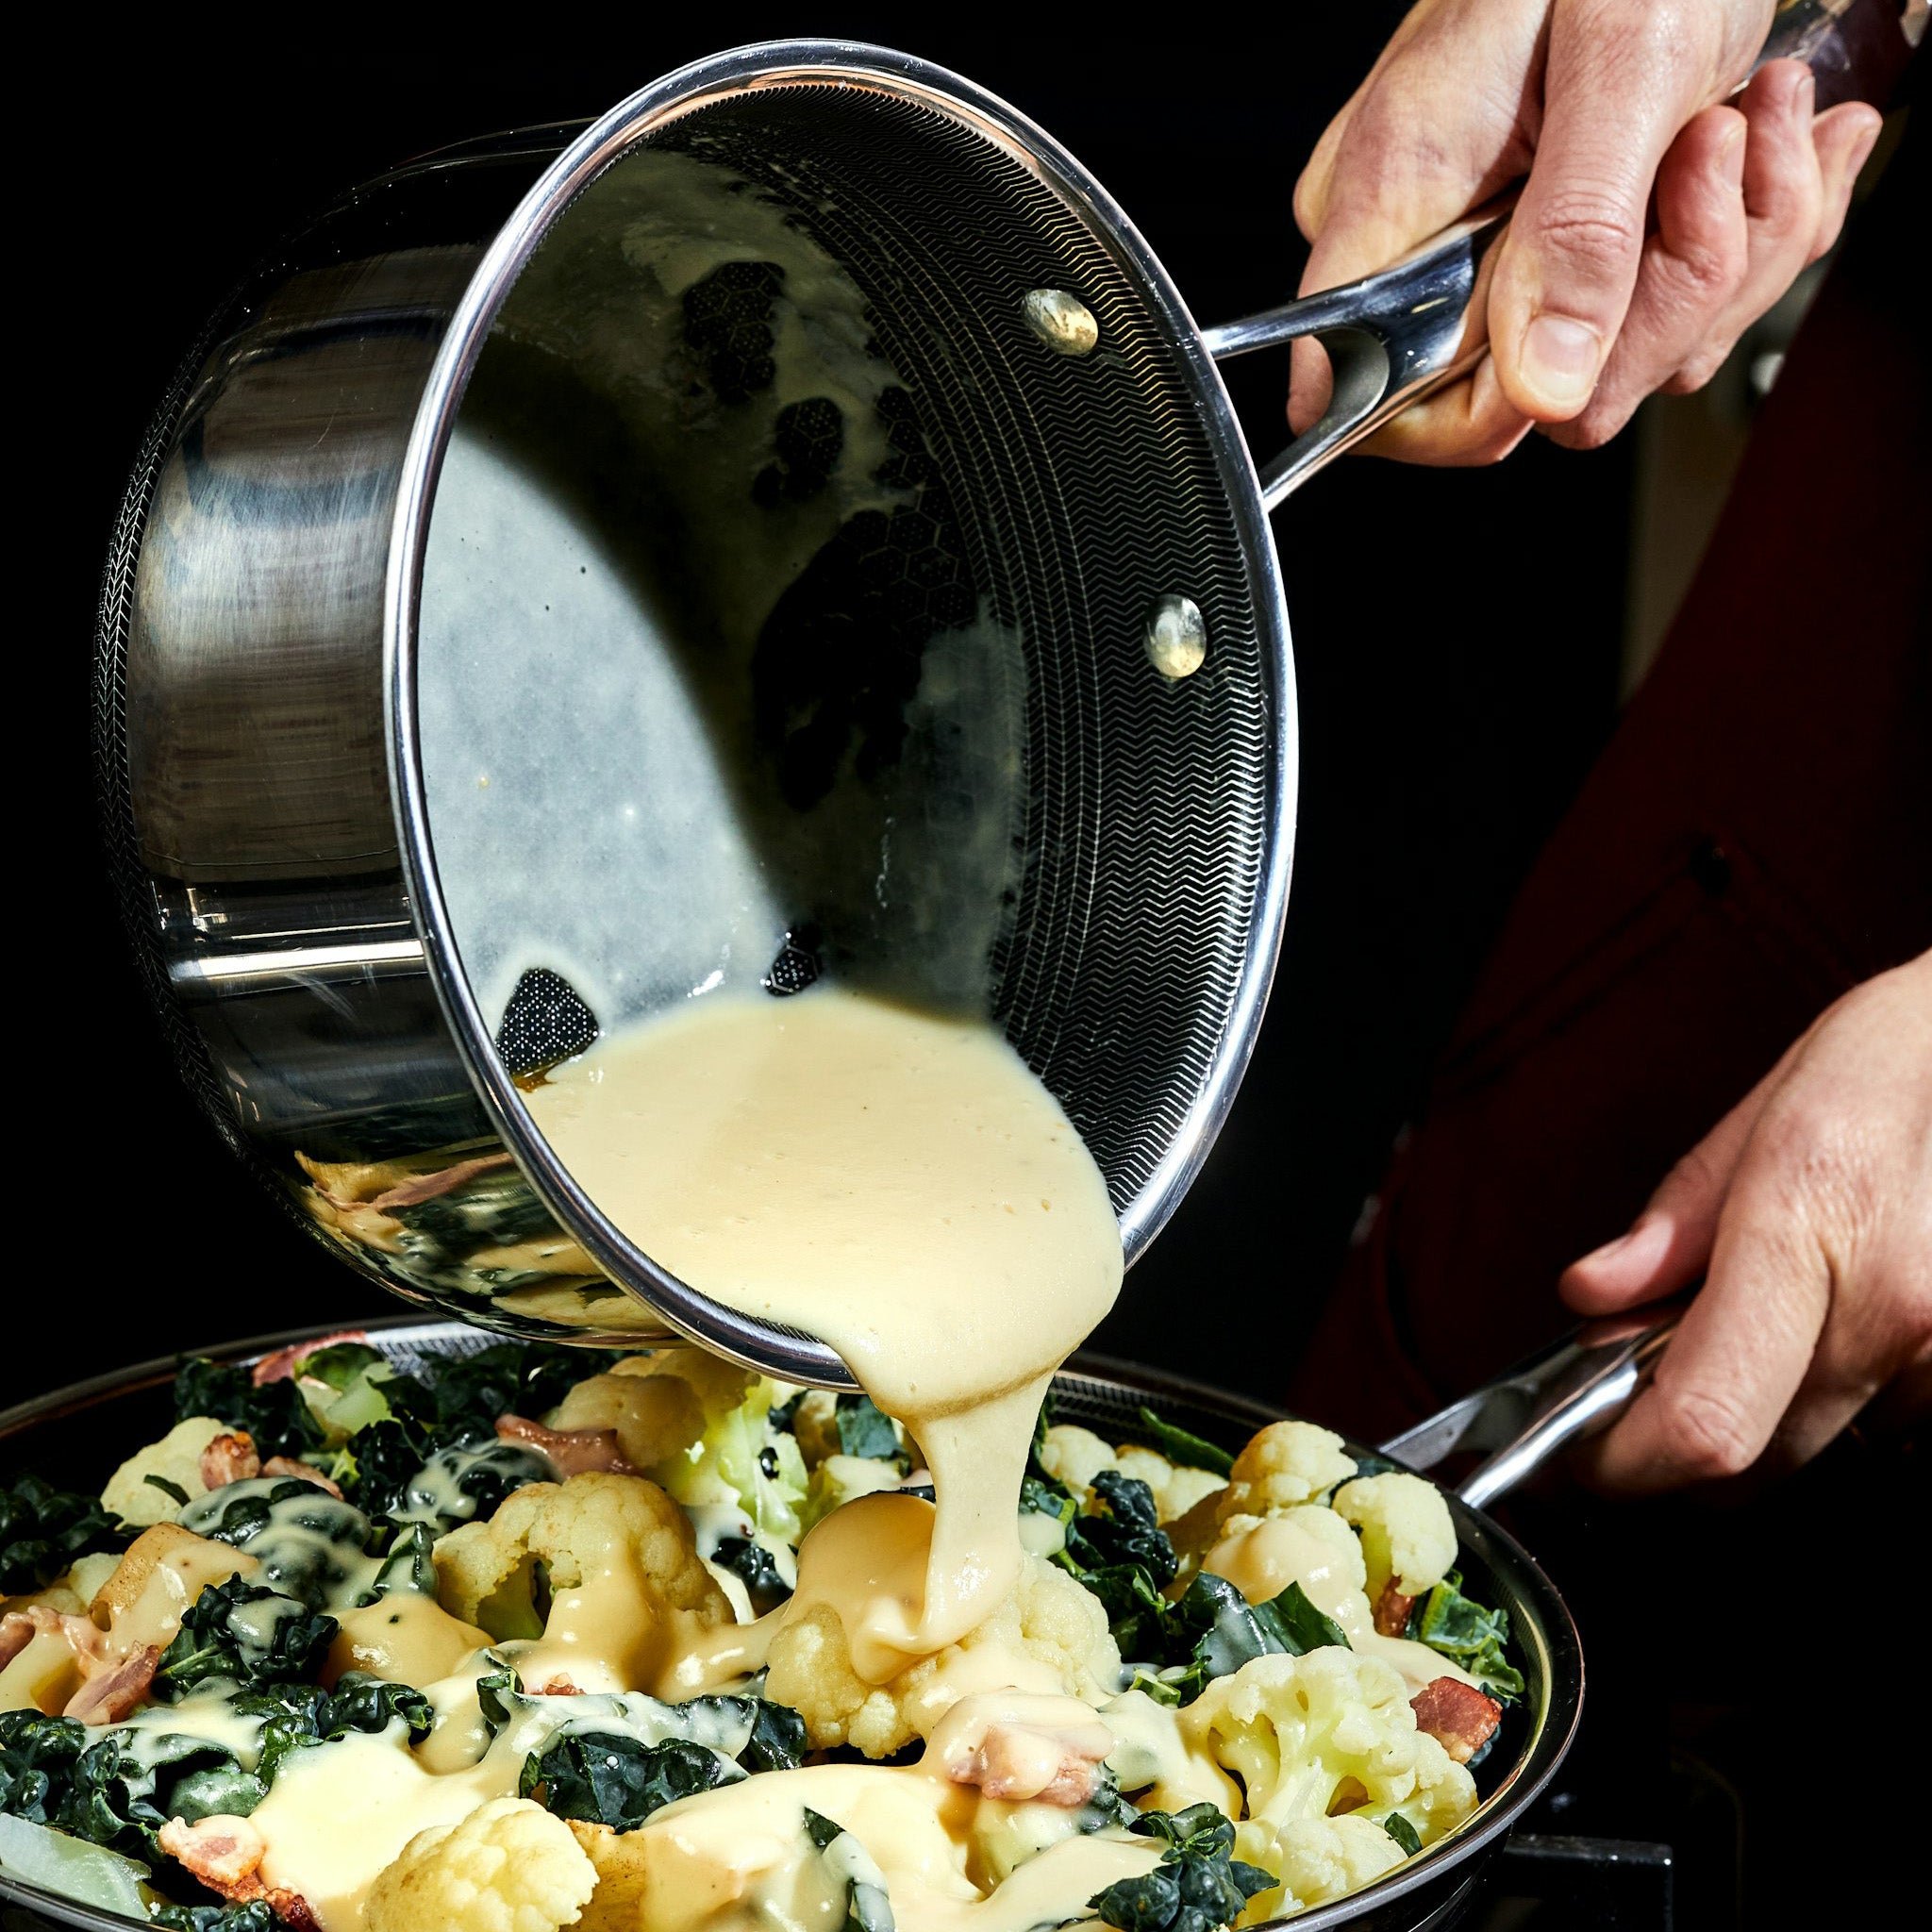 Pouring creamy sauce over vegetables from a pot.